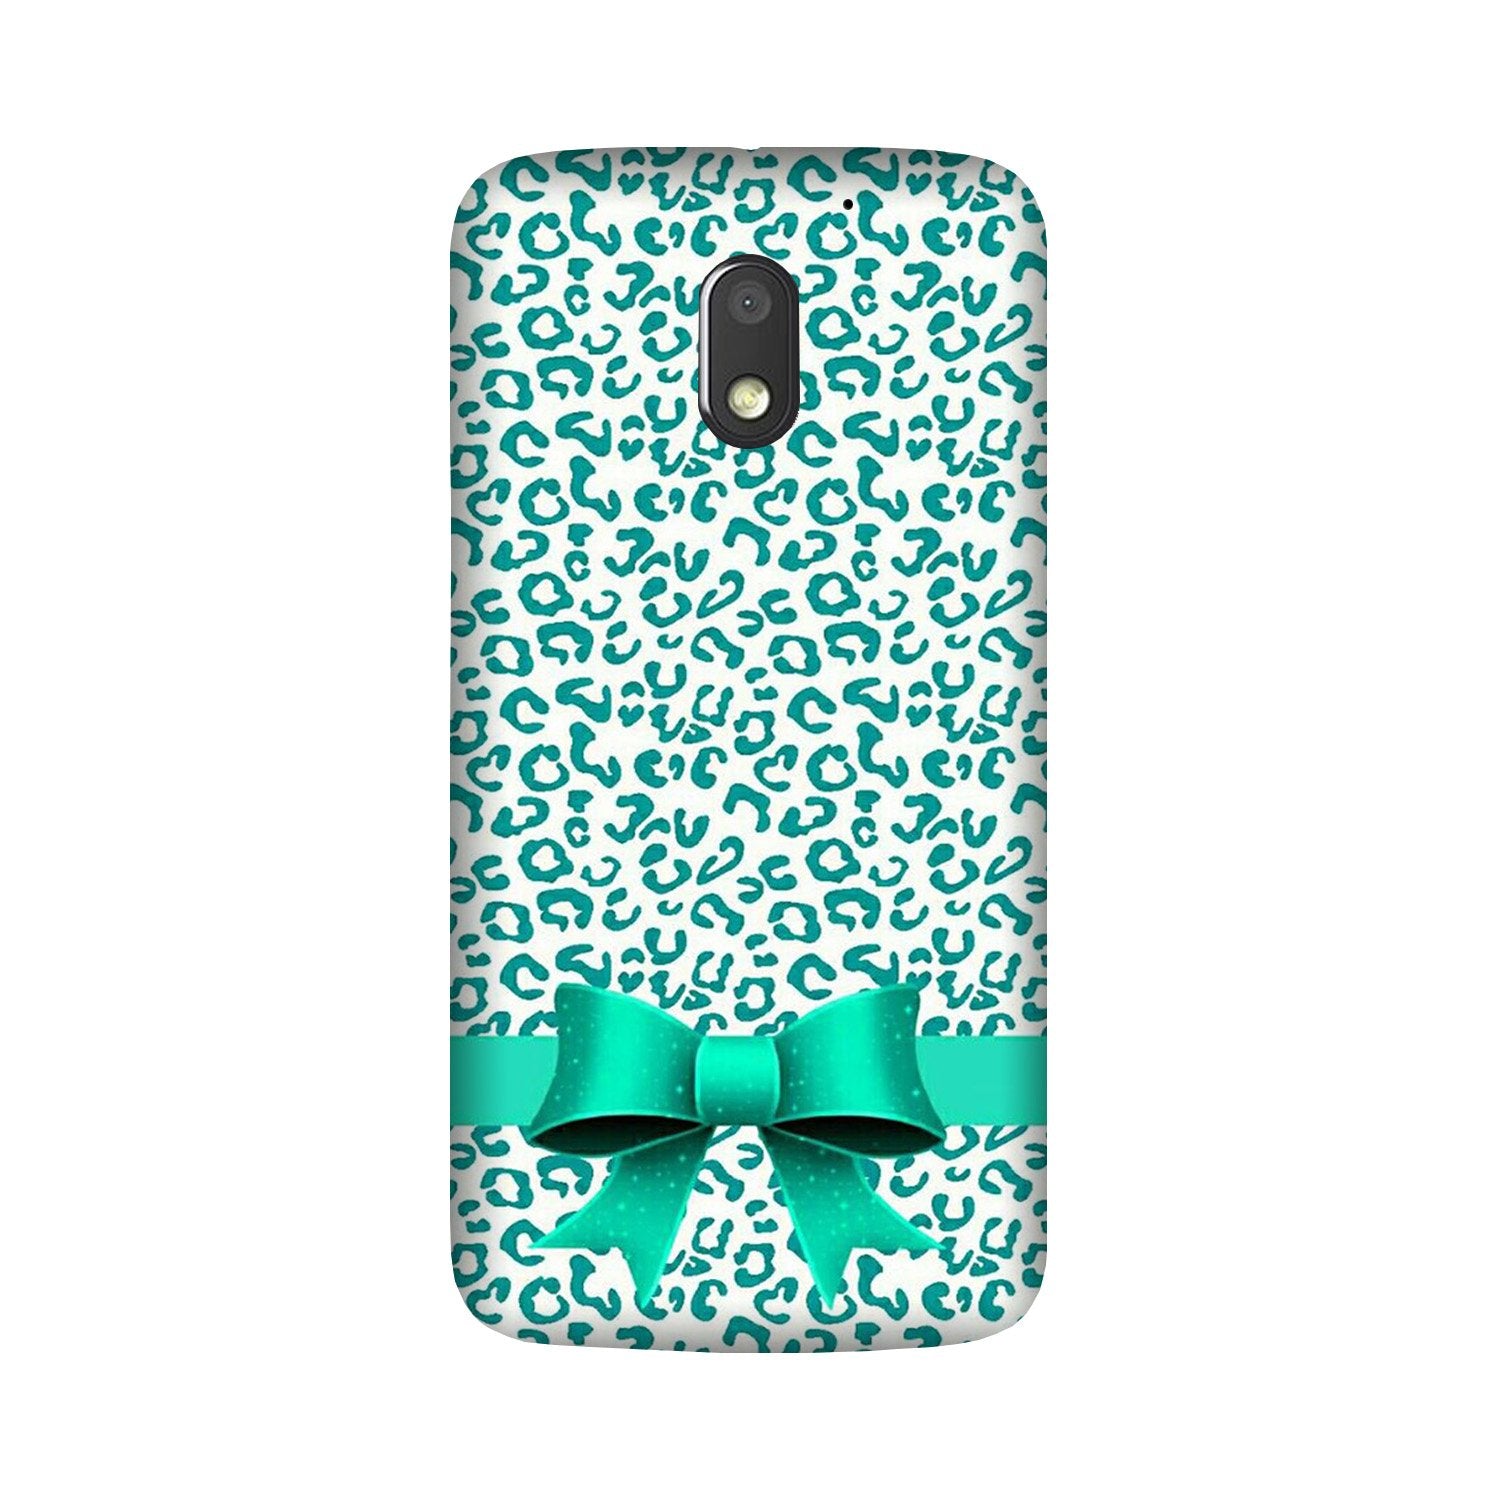 Gift Wrap6 Case for Moto G4 Play